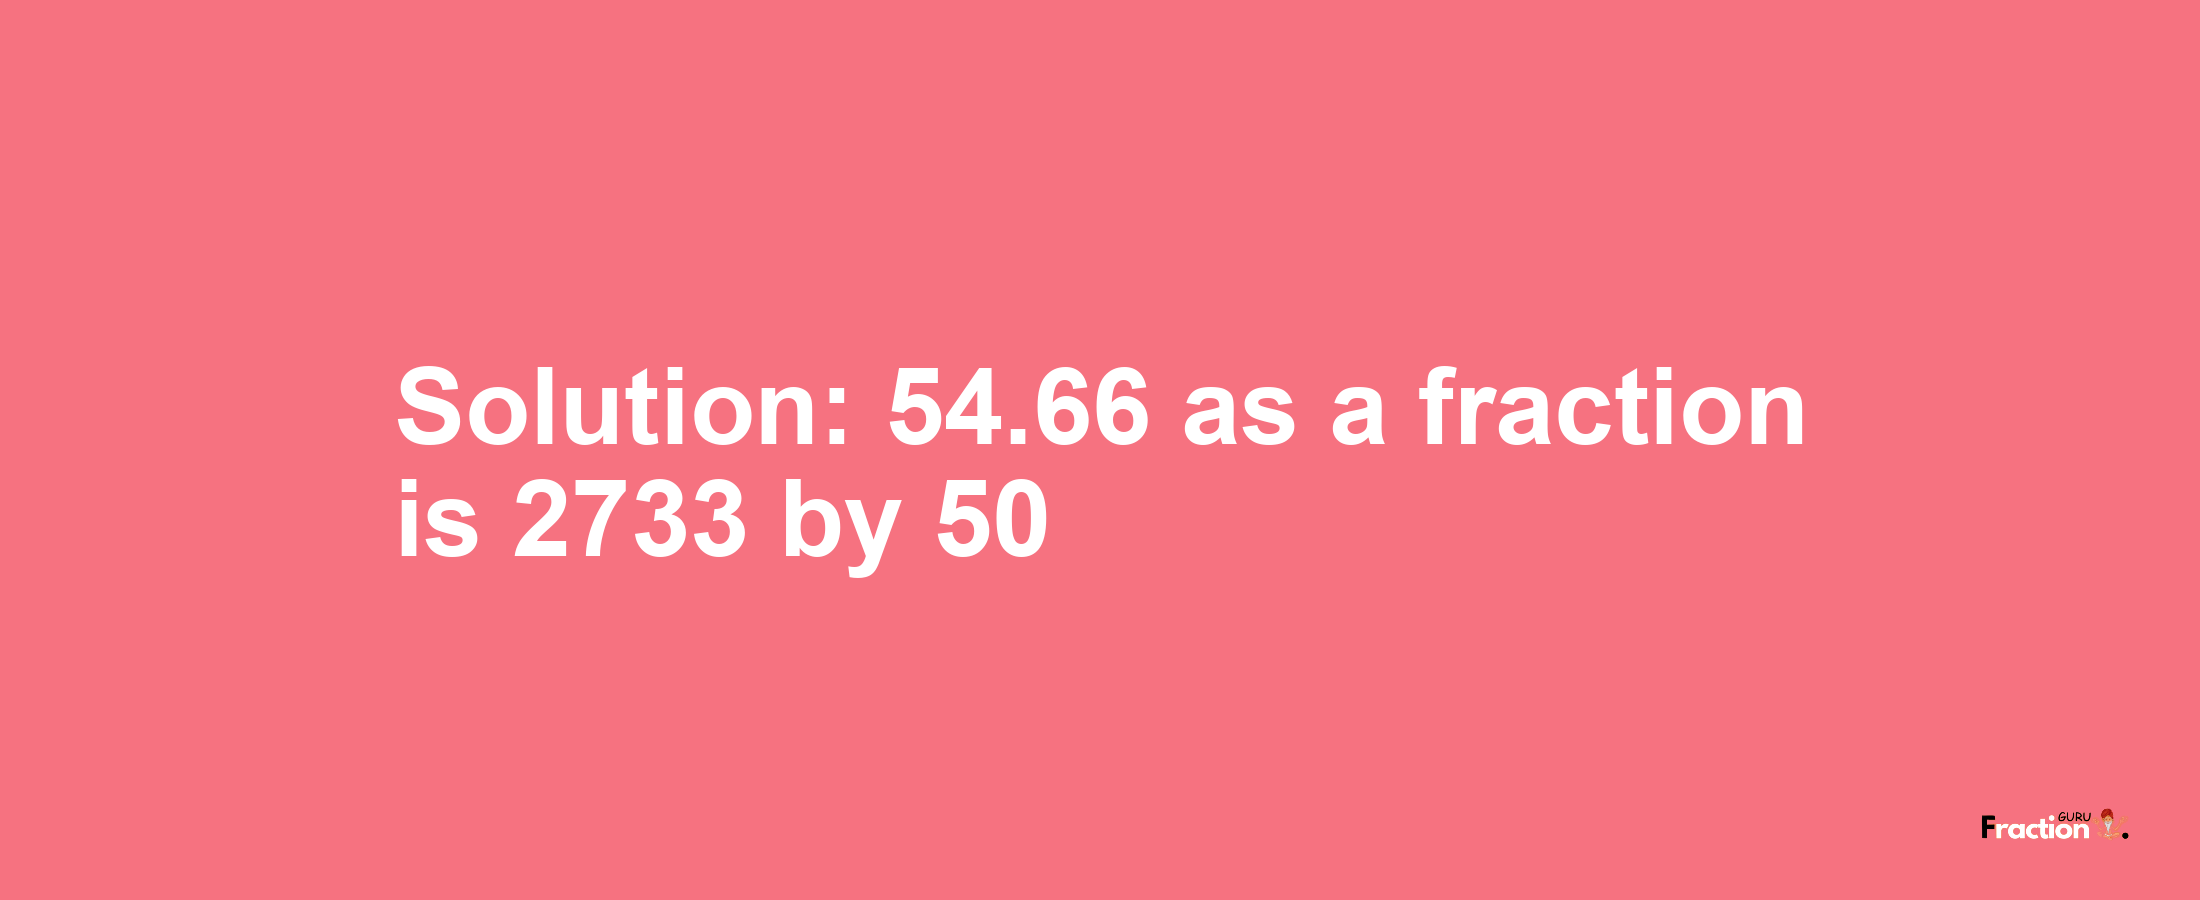 Solution:54.66 as a fraction is 2733/50